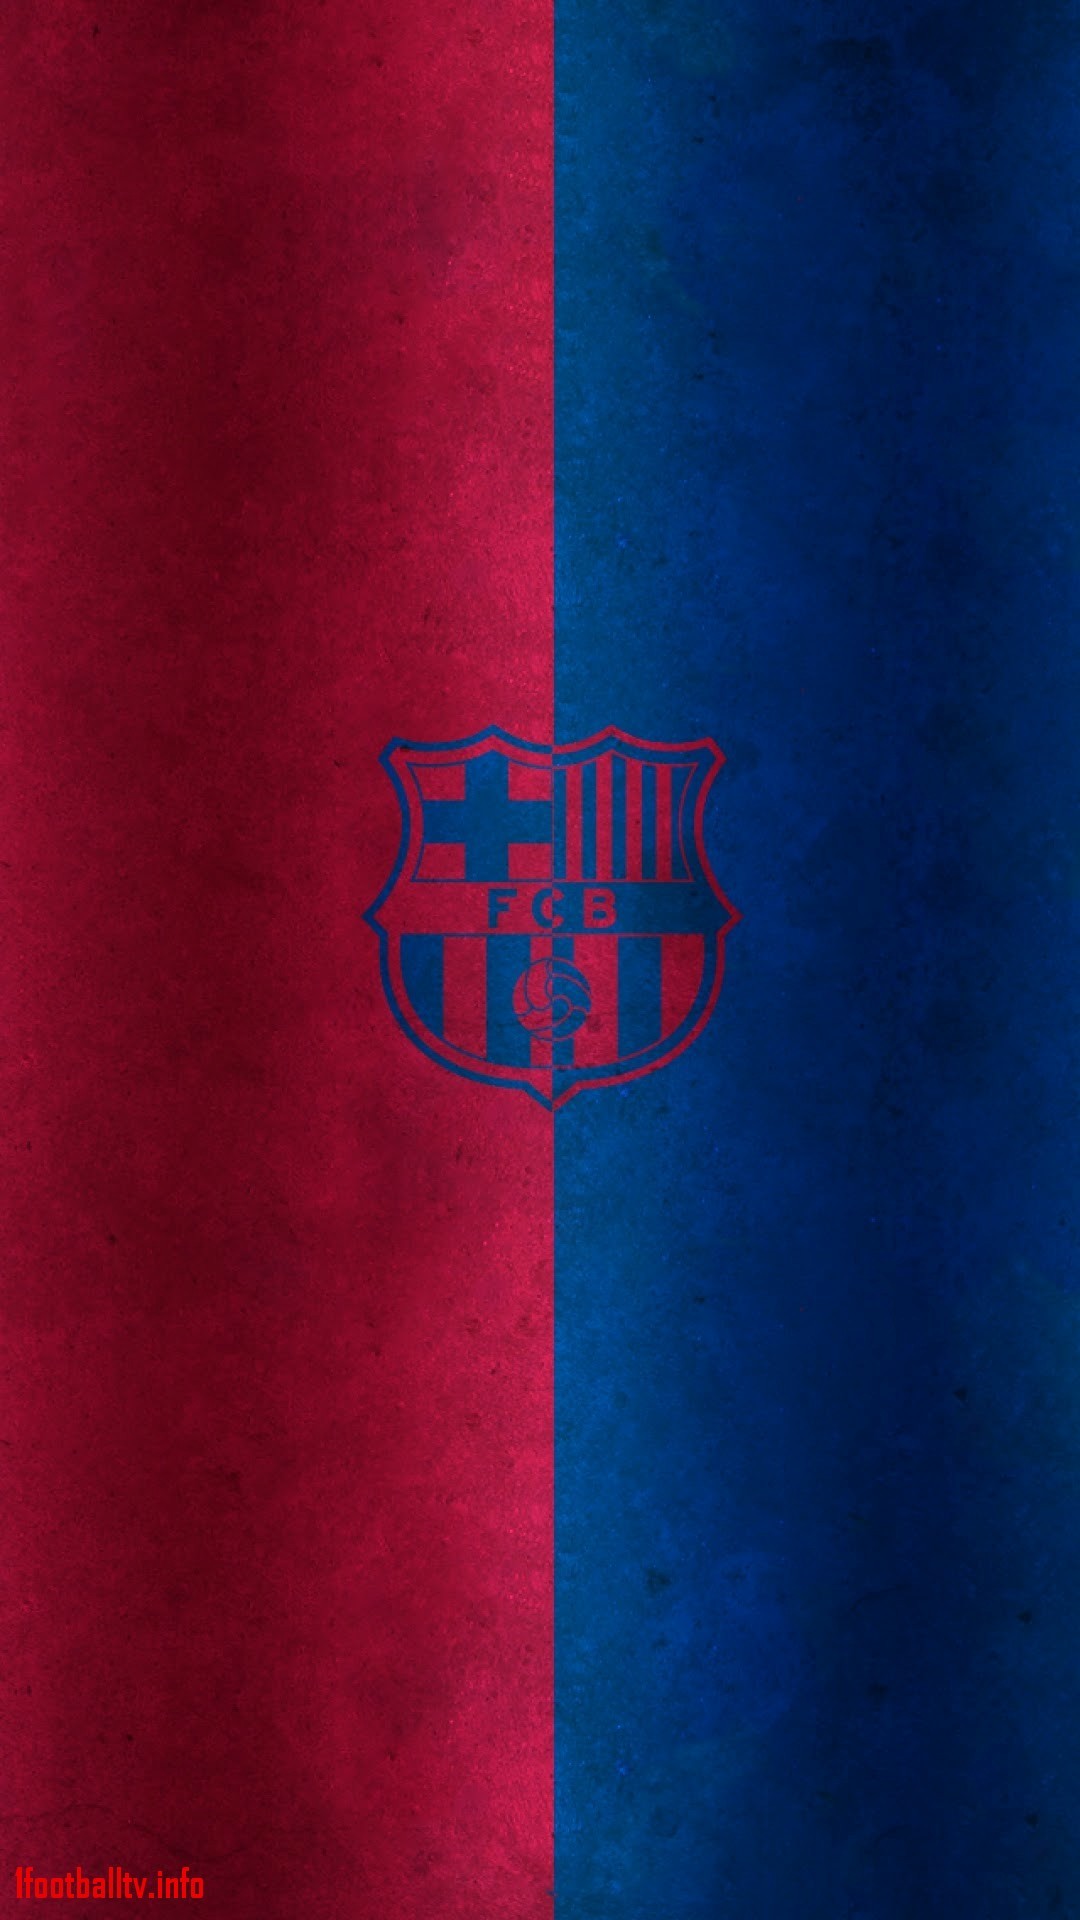 1080x1920 fc barcelona wallpapers for iphone 6 plus inspirational hd wallpapers red  and blue fc barcelona logo